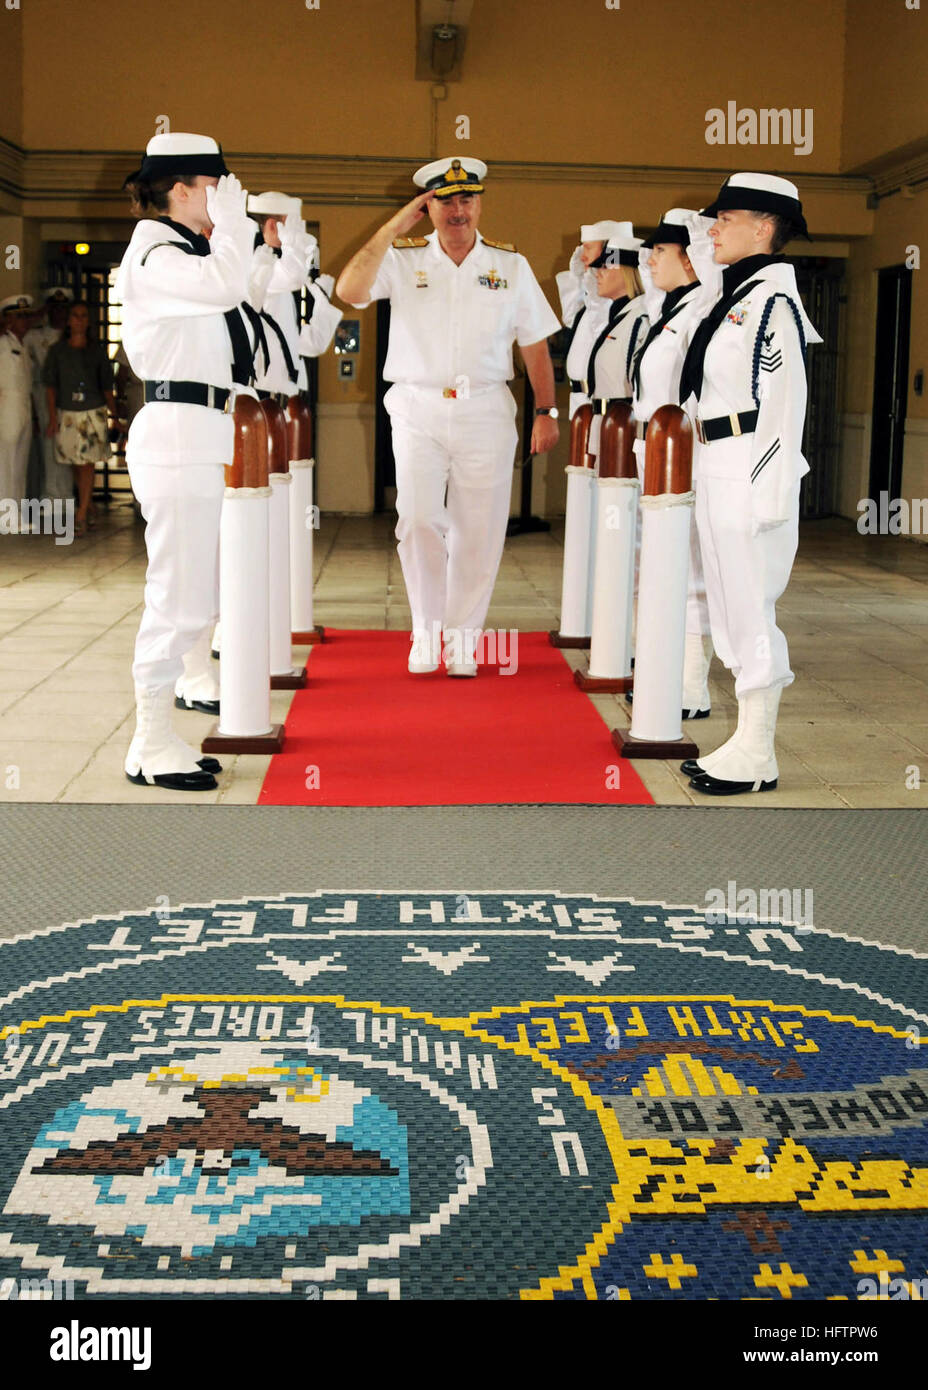 090909-N-6138K-002:  NAPLES, Italy (August 13, 2009) – Vice Adm. George Karamalikis, chief of the Hellenic Navy general staff, formally arrives at the U.S. Naval Forces Europe-U.S. Naval Forces Africa/U.S. 6th Fleet headquarters on Naval Support Activity Capodichino here.  Karamalikis is in Naples as part of a visit with locally-based U.S. Navy and NATO leadership.  Karamalikis' visit demonstrates the strong and evolving relationship between the U.S. and Hellenic navies.   US Navy photo by Mass Communication Specialist 1st Class (SW) Gary Keen Vice Adm. George Karamalikis, HN at Naples Stock Photo